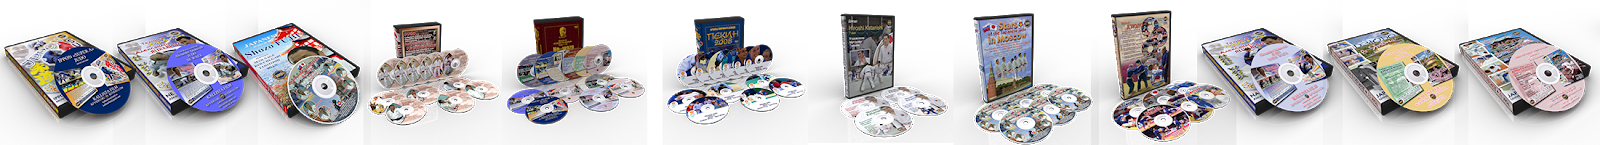 Judo dvds. Exercises. Methods. Technique. Olympic Games. 319 products.